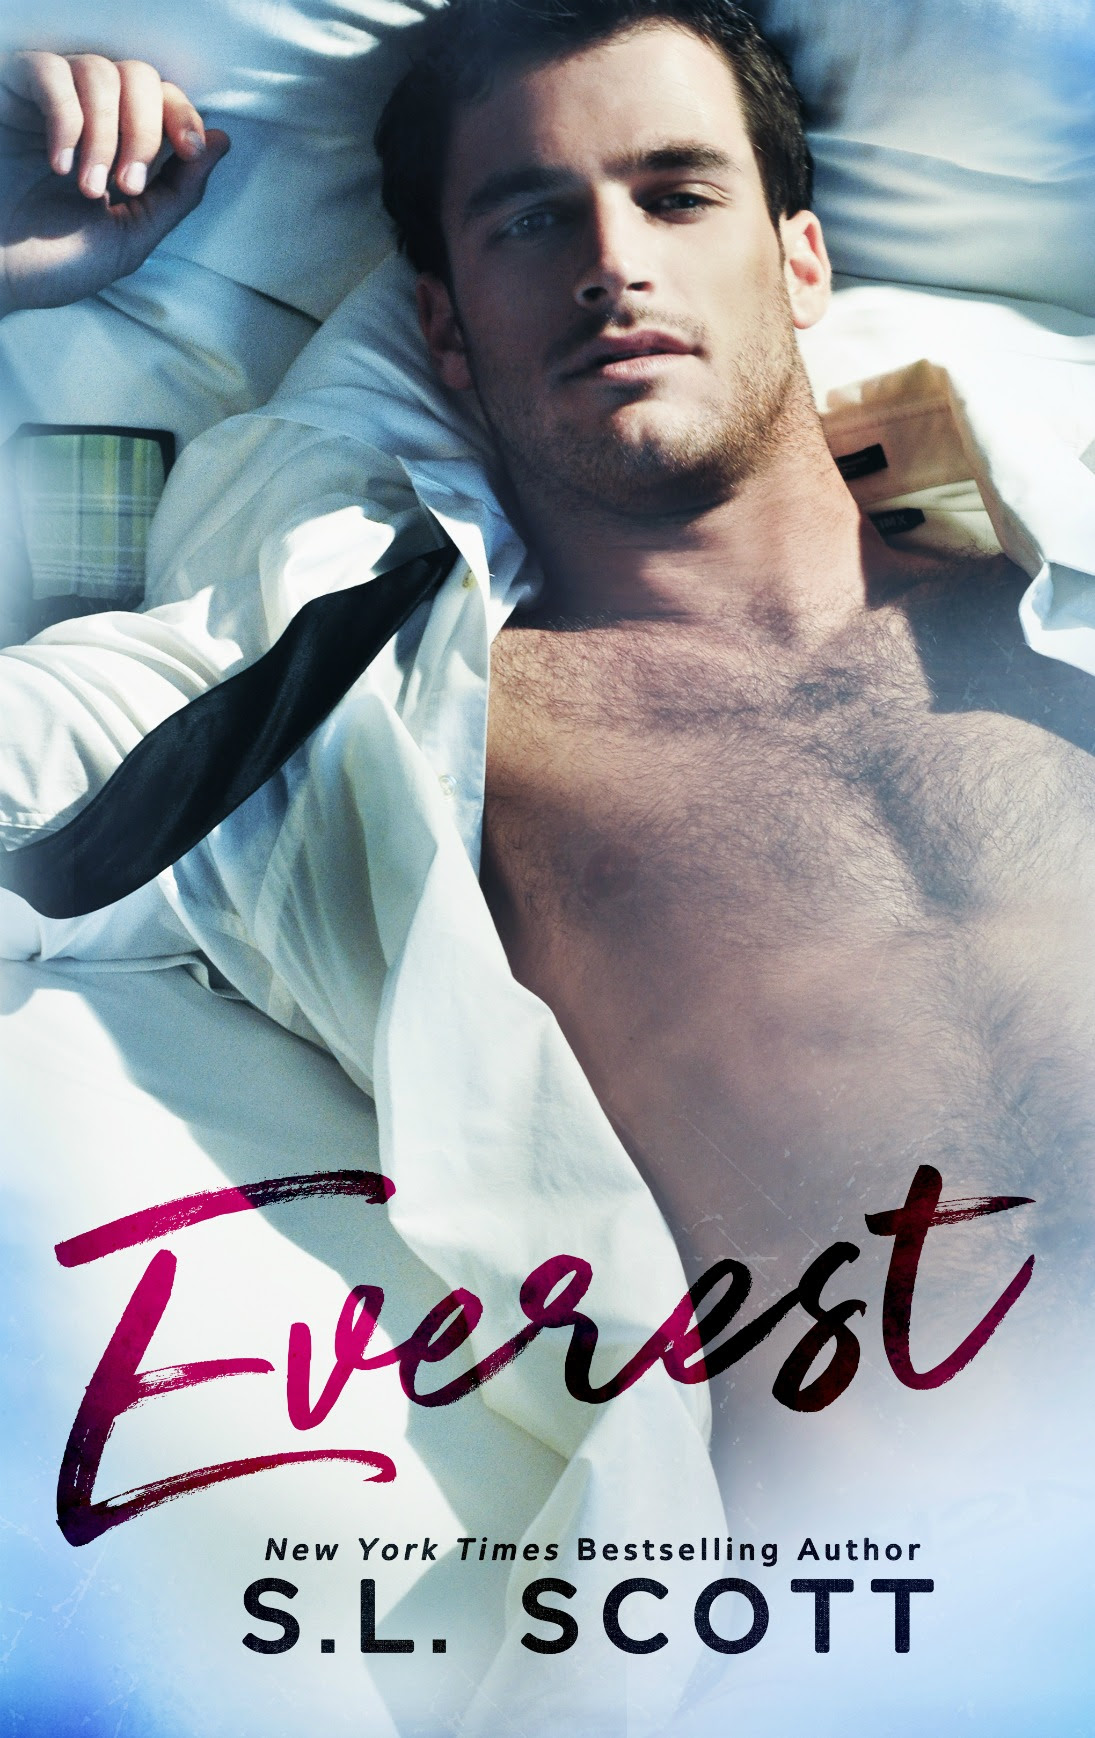 Now Available: Everest by S.L. Scott